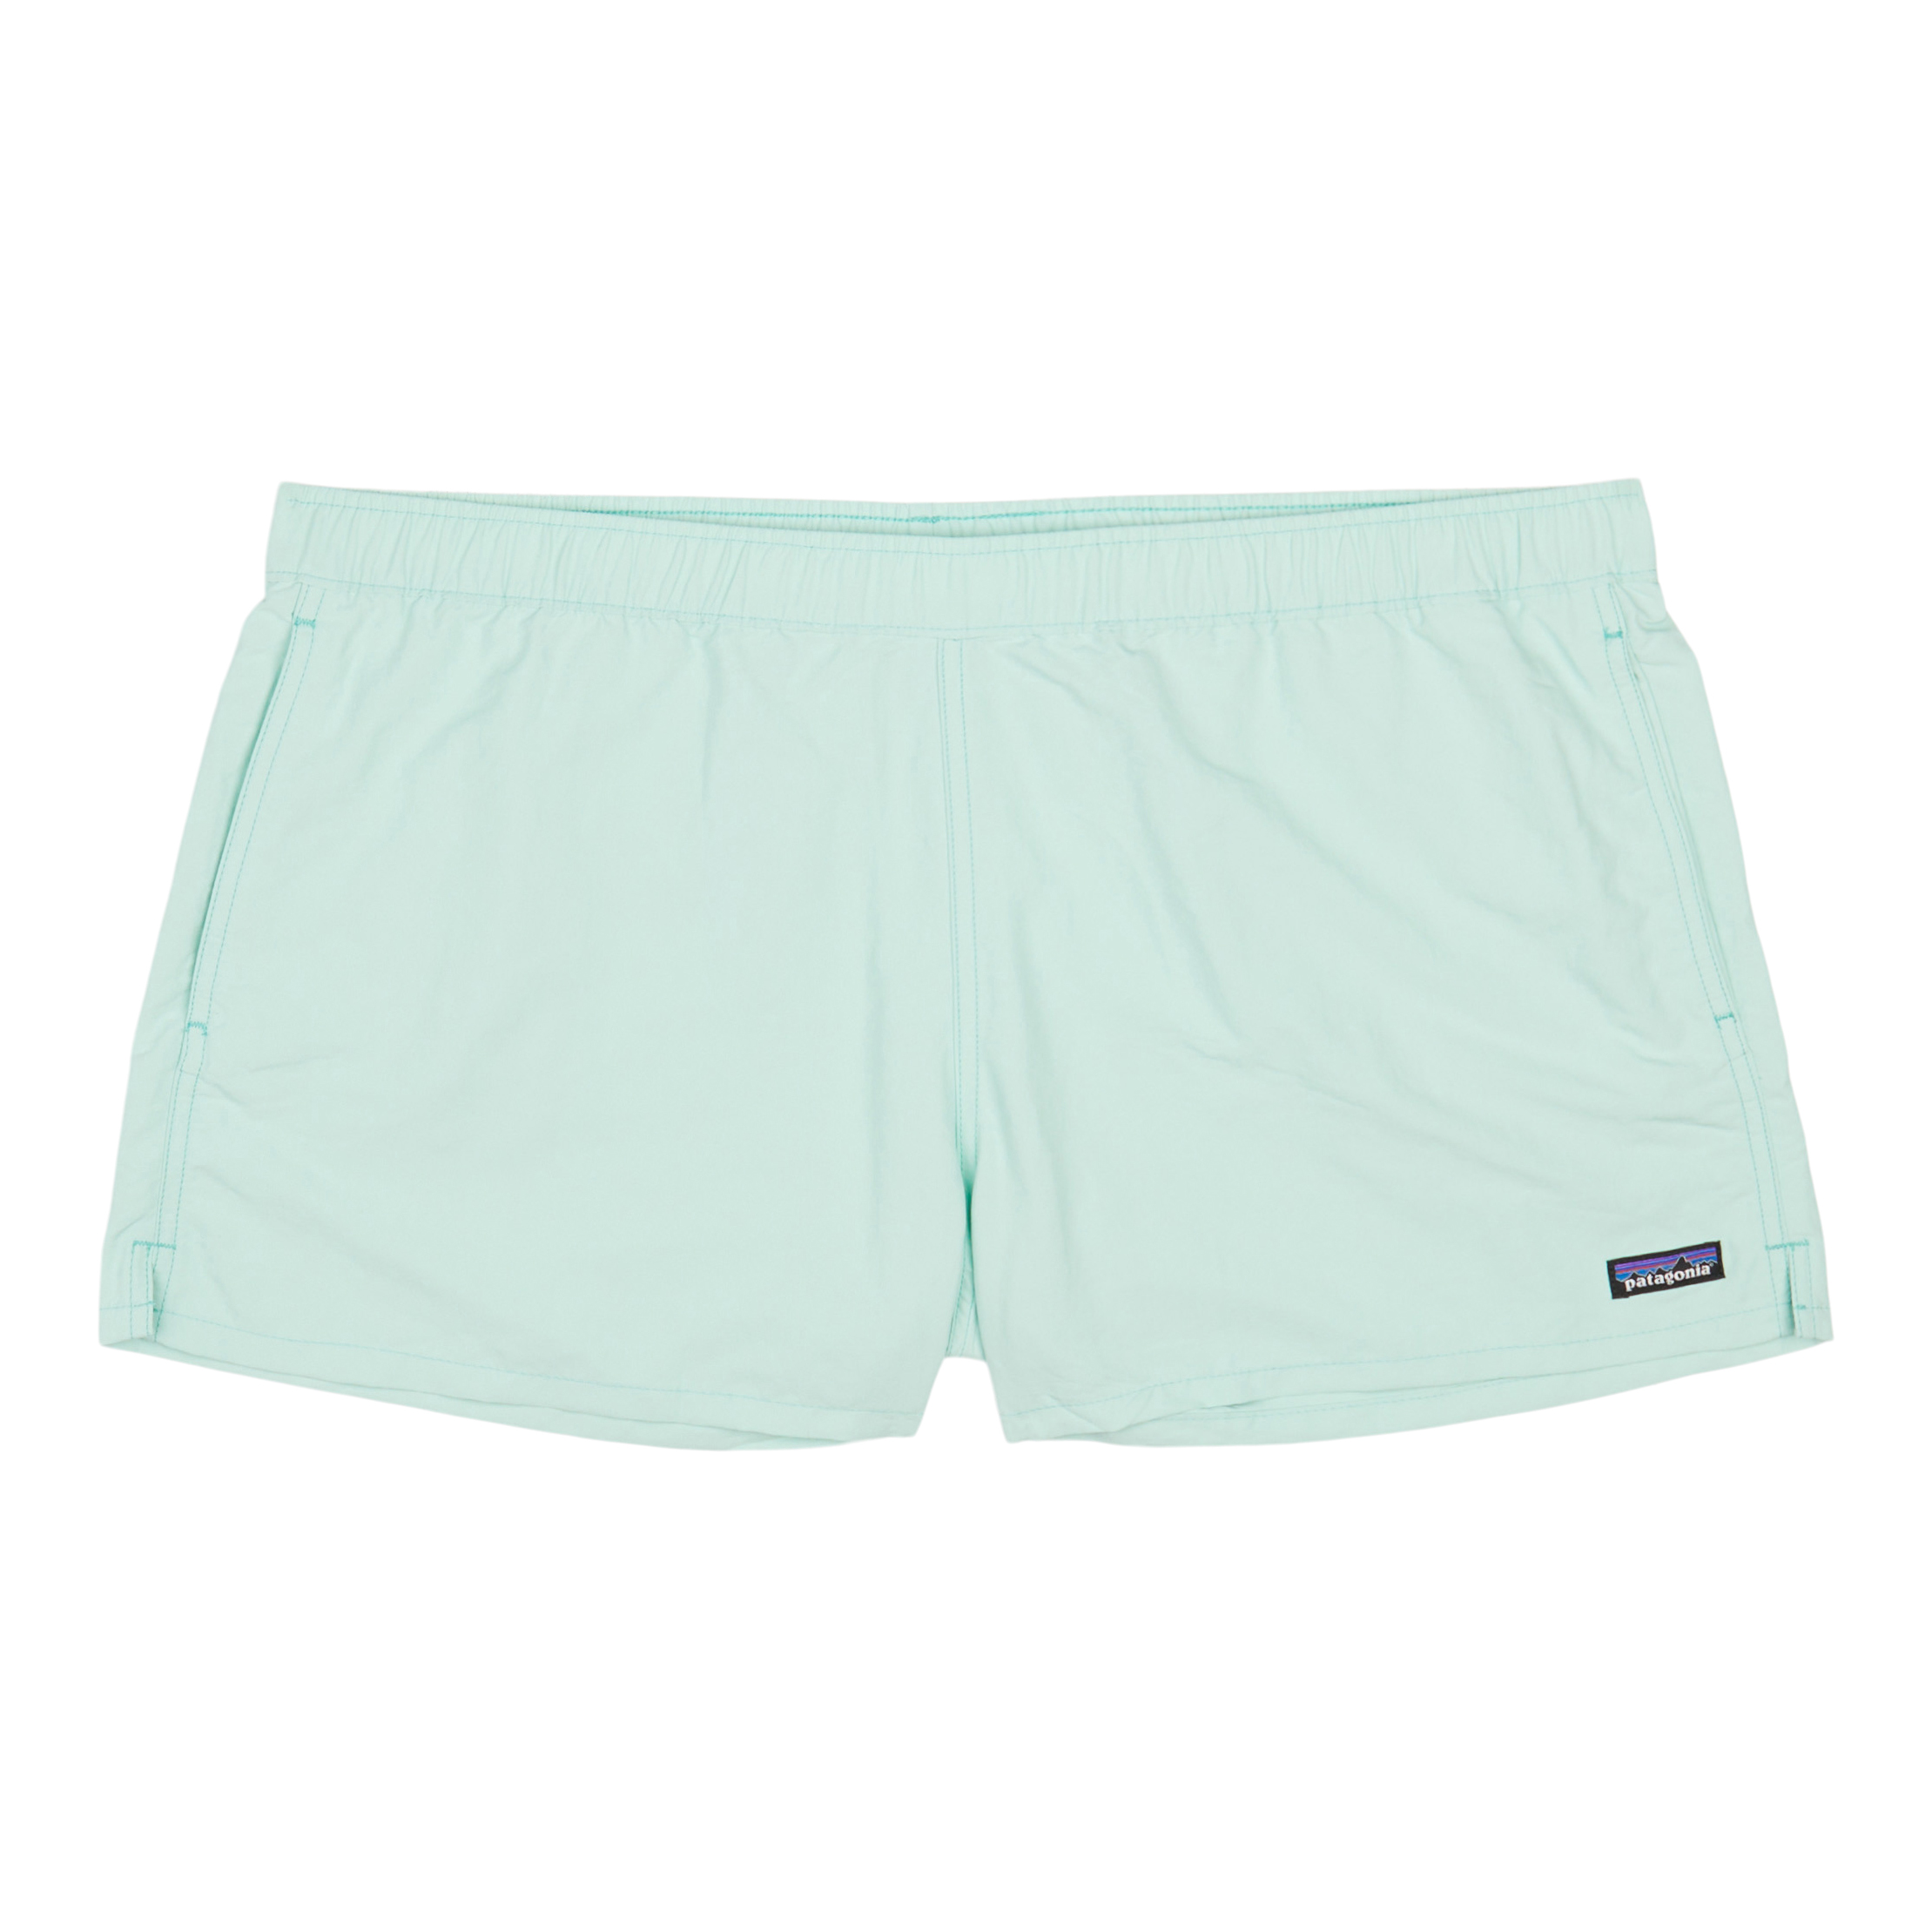 Patagonia Women's Barely Baggies Shorts - Current Blue - XL